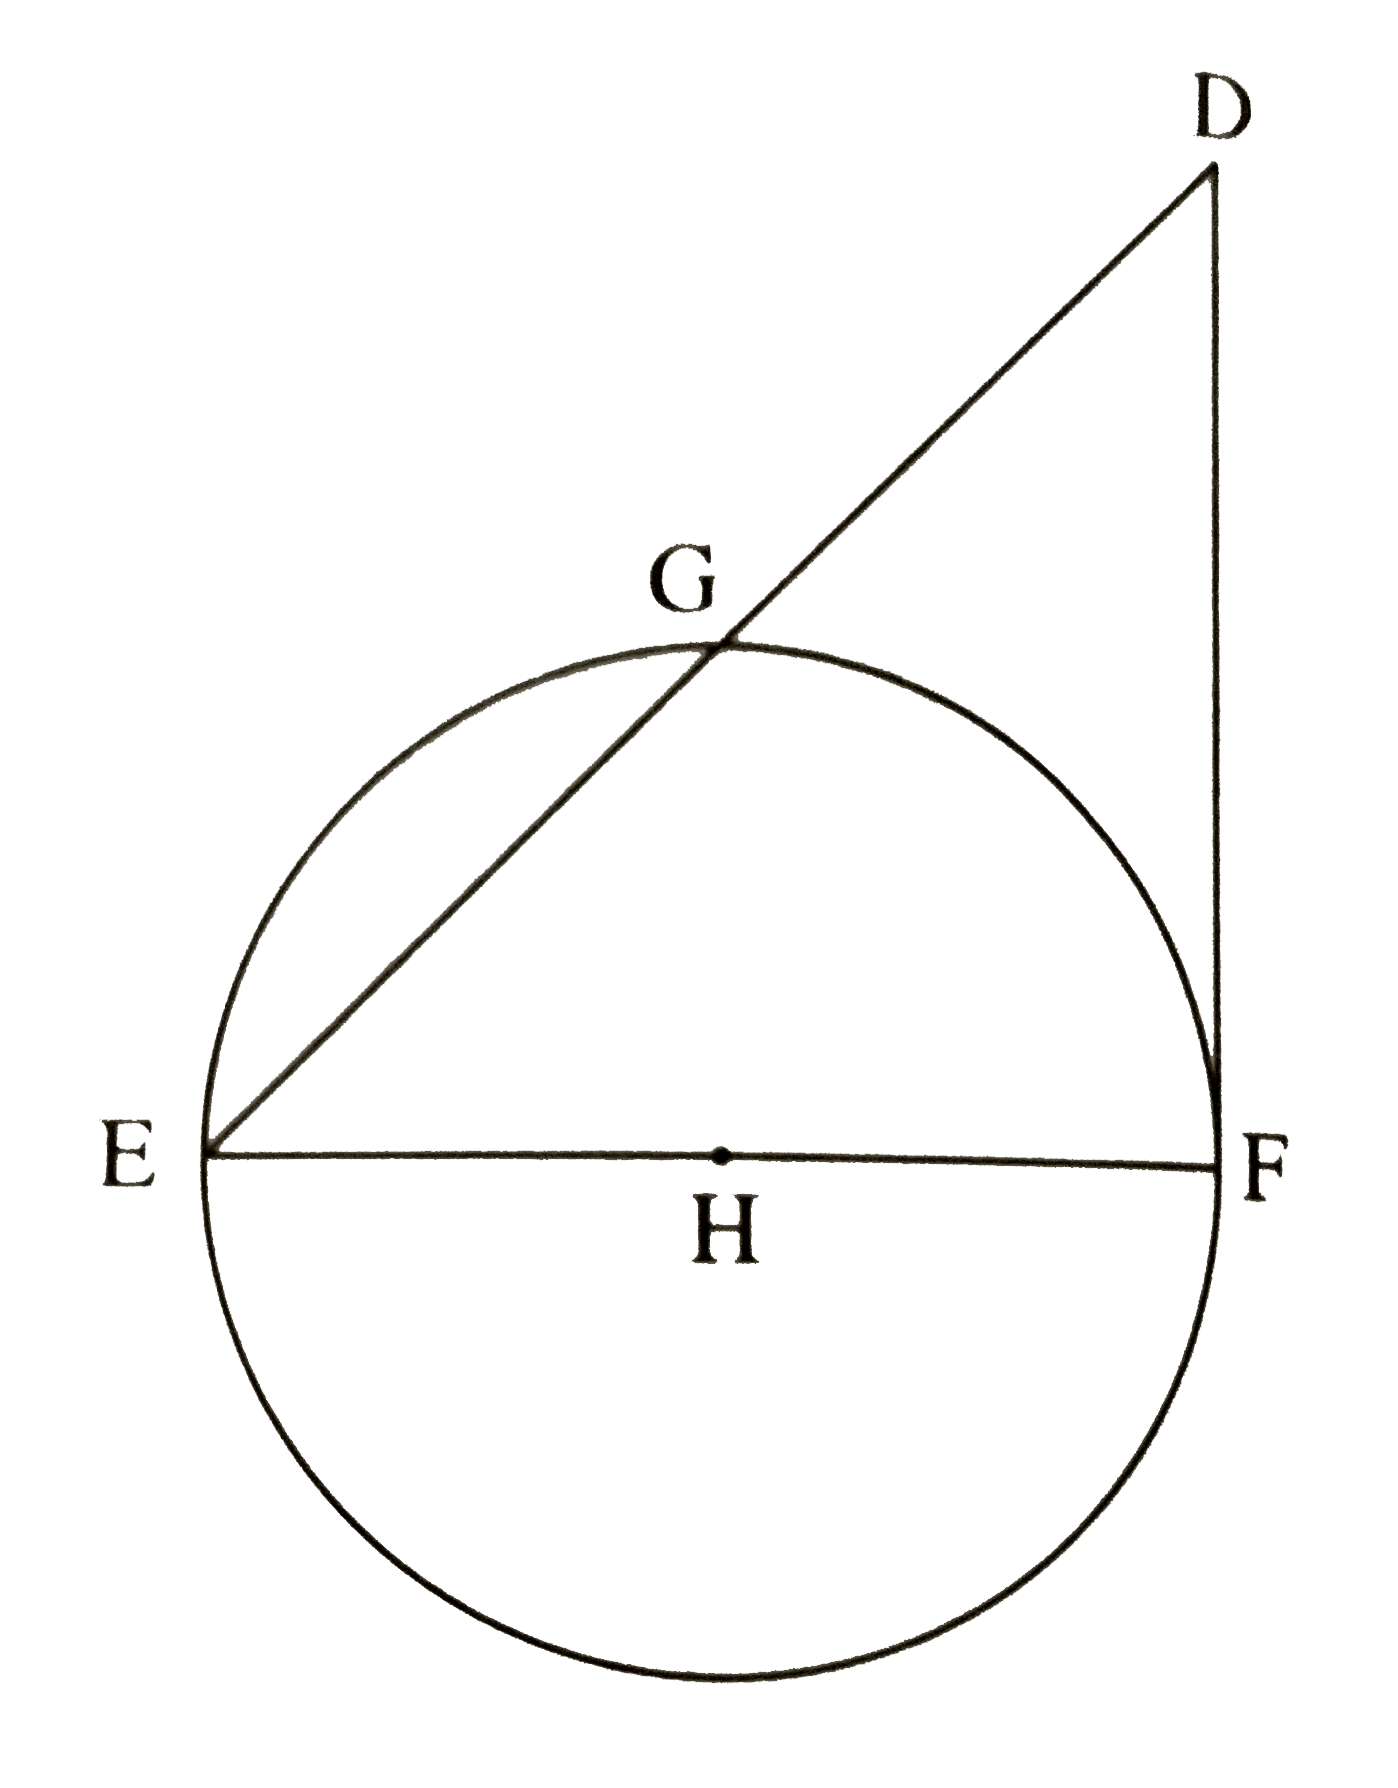 In figure, seg EF is a diameter and seg DF is a tangent segment. The radius of the circle is r. Prove that, DExxGE=4r^(2).